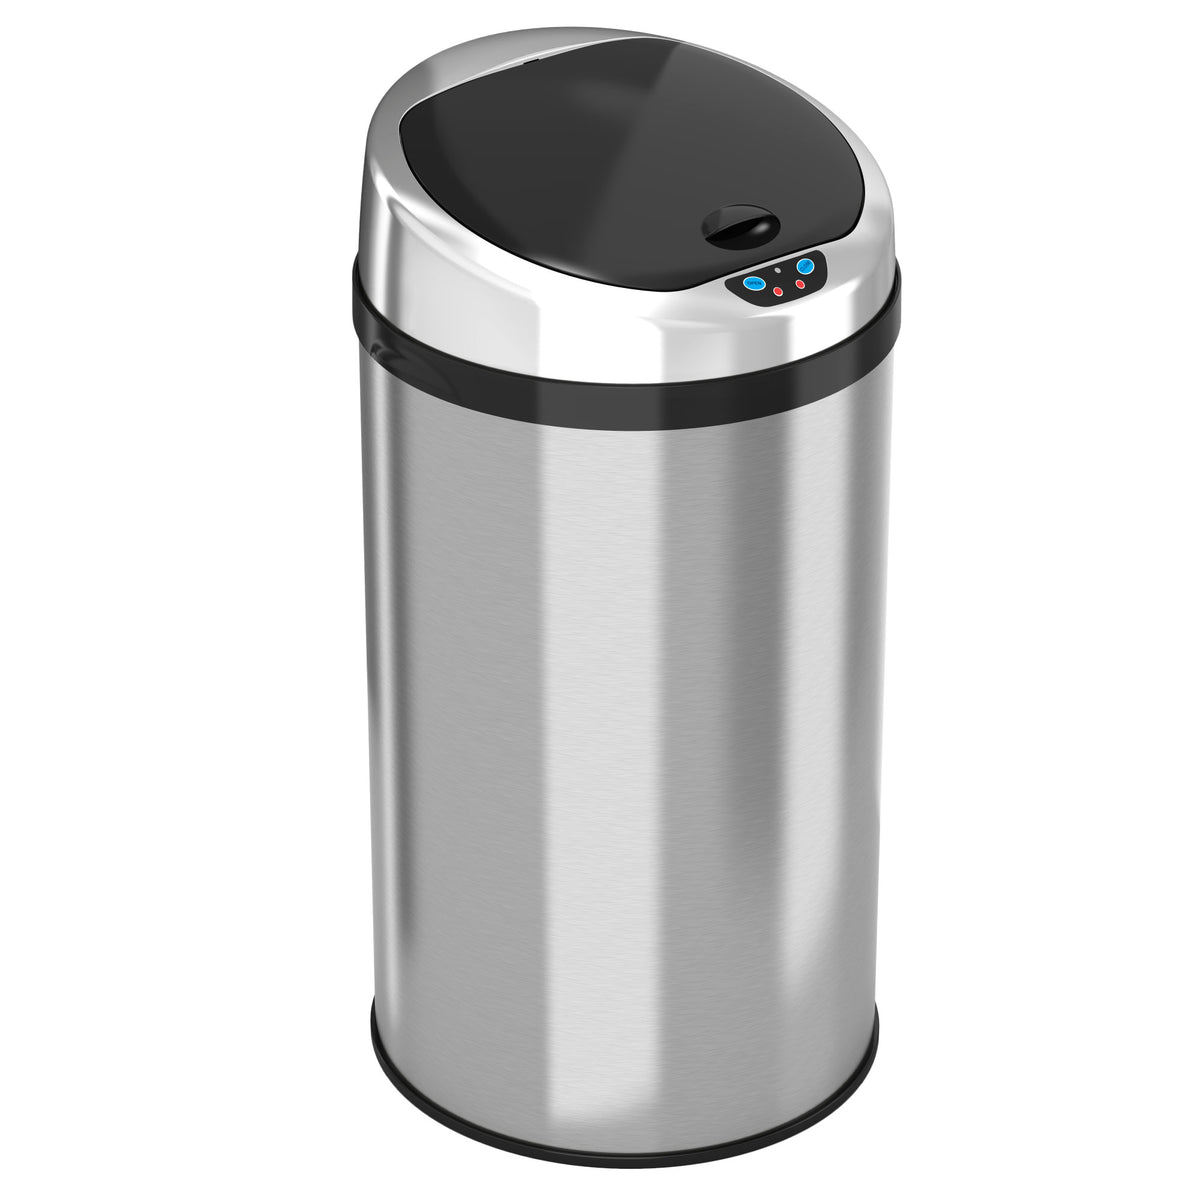 iTouchless 8 Gallon Round Sensor Trash Can with Deodorizer, Stainless Steel - Silver